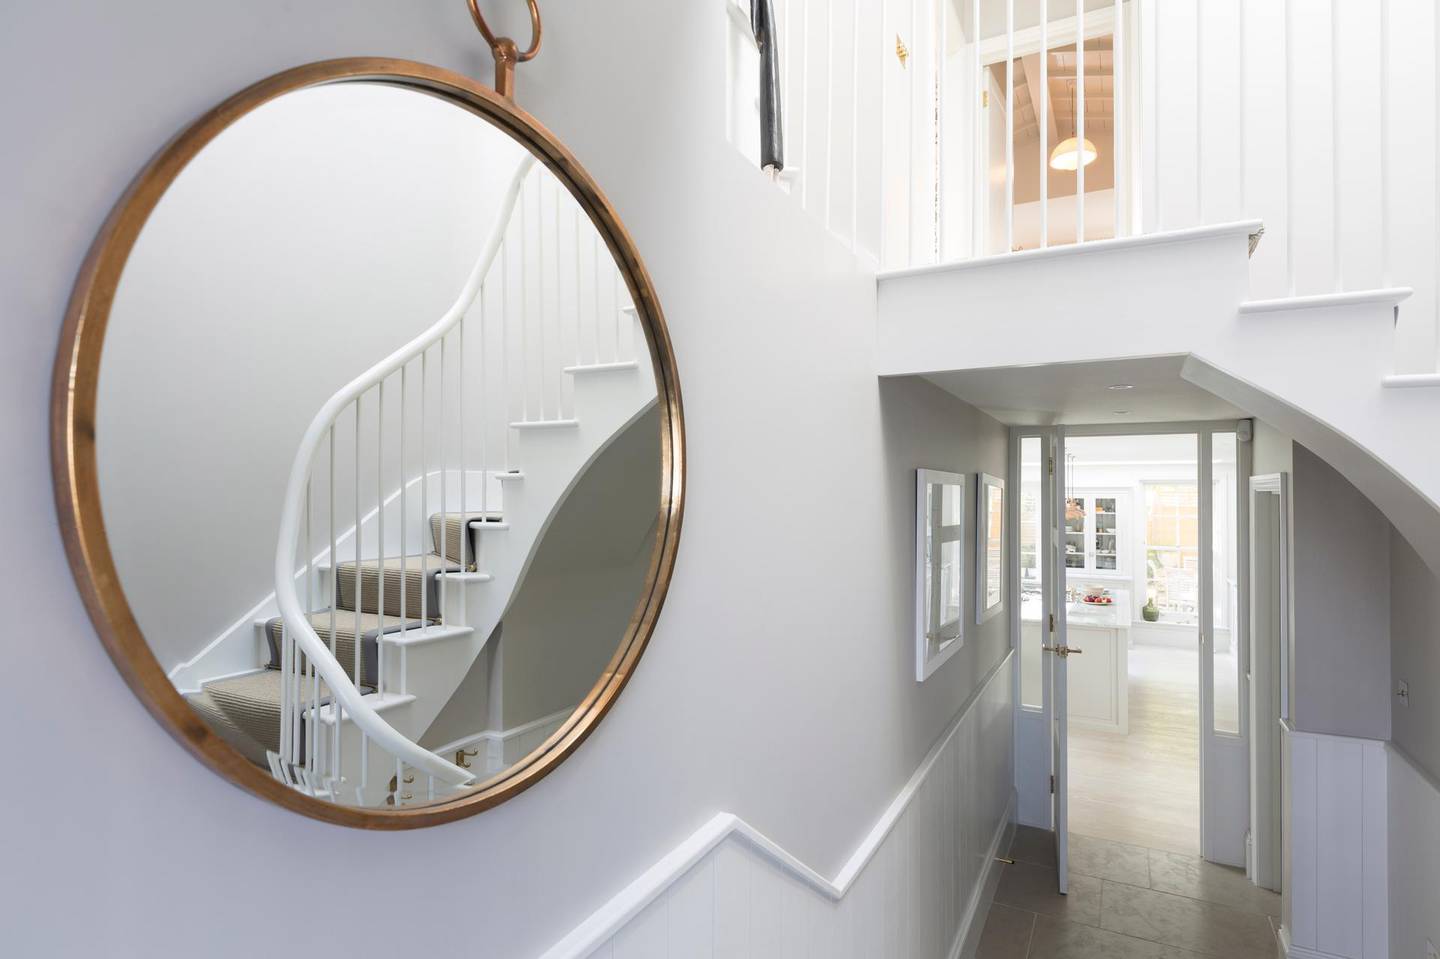 Reflection of foyer staircase in round mirror. Getty Images